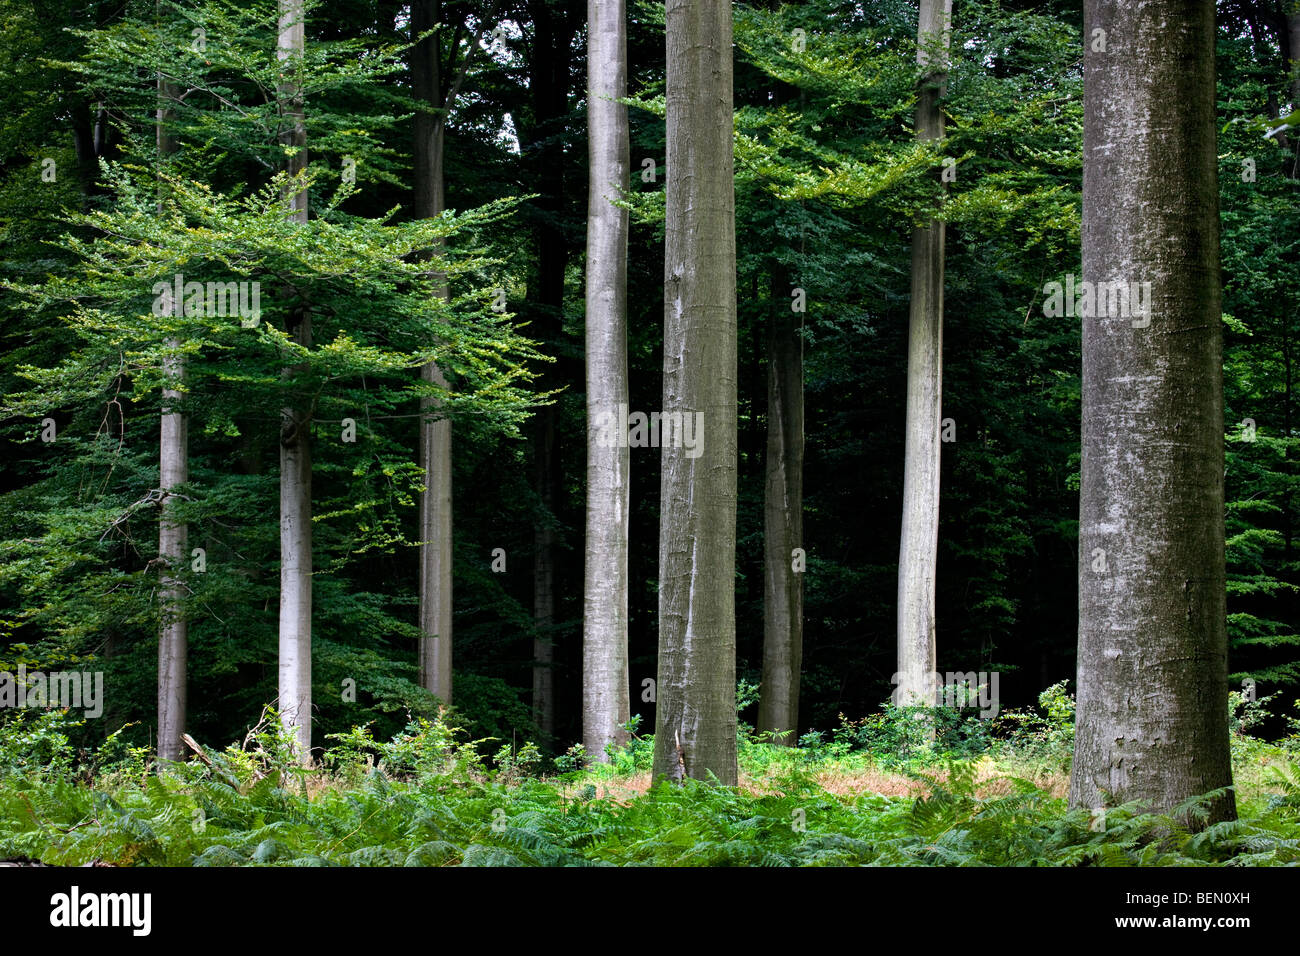 Beech trees (Fagus sylvatica) in the Sonian Forest, Brussels, Belgium Stock Photo